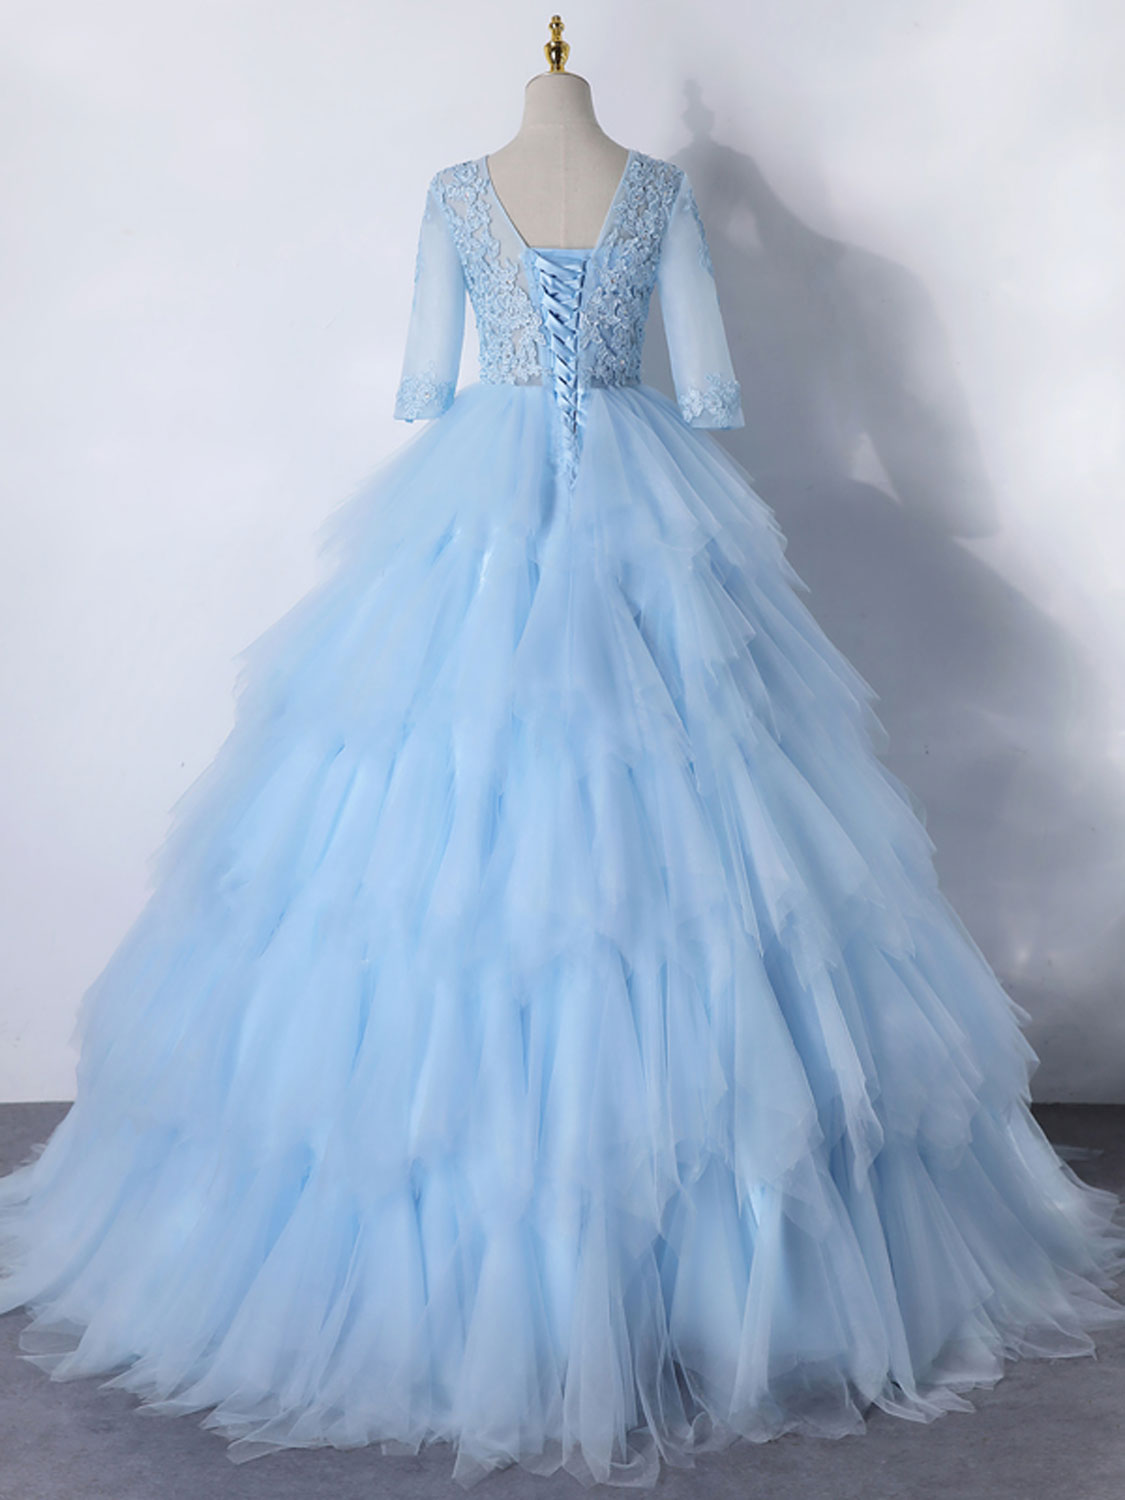 Bridesmaid Dresses Photos Gallery, Blue A-Line Tulle Lace Long Prom Dress, Blue Lace Formal Evening Dresses